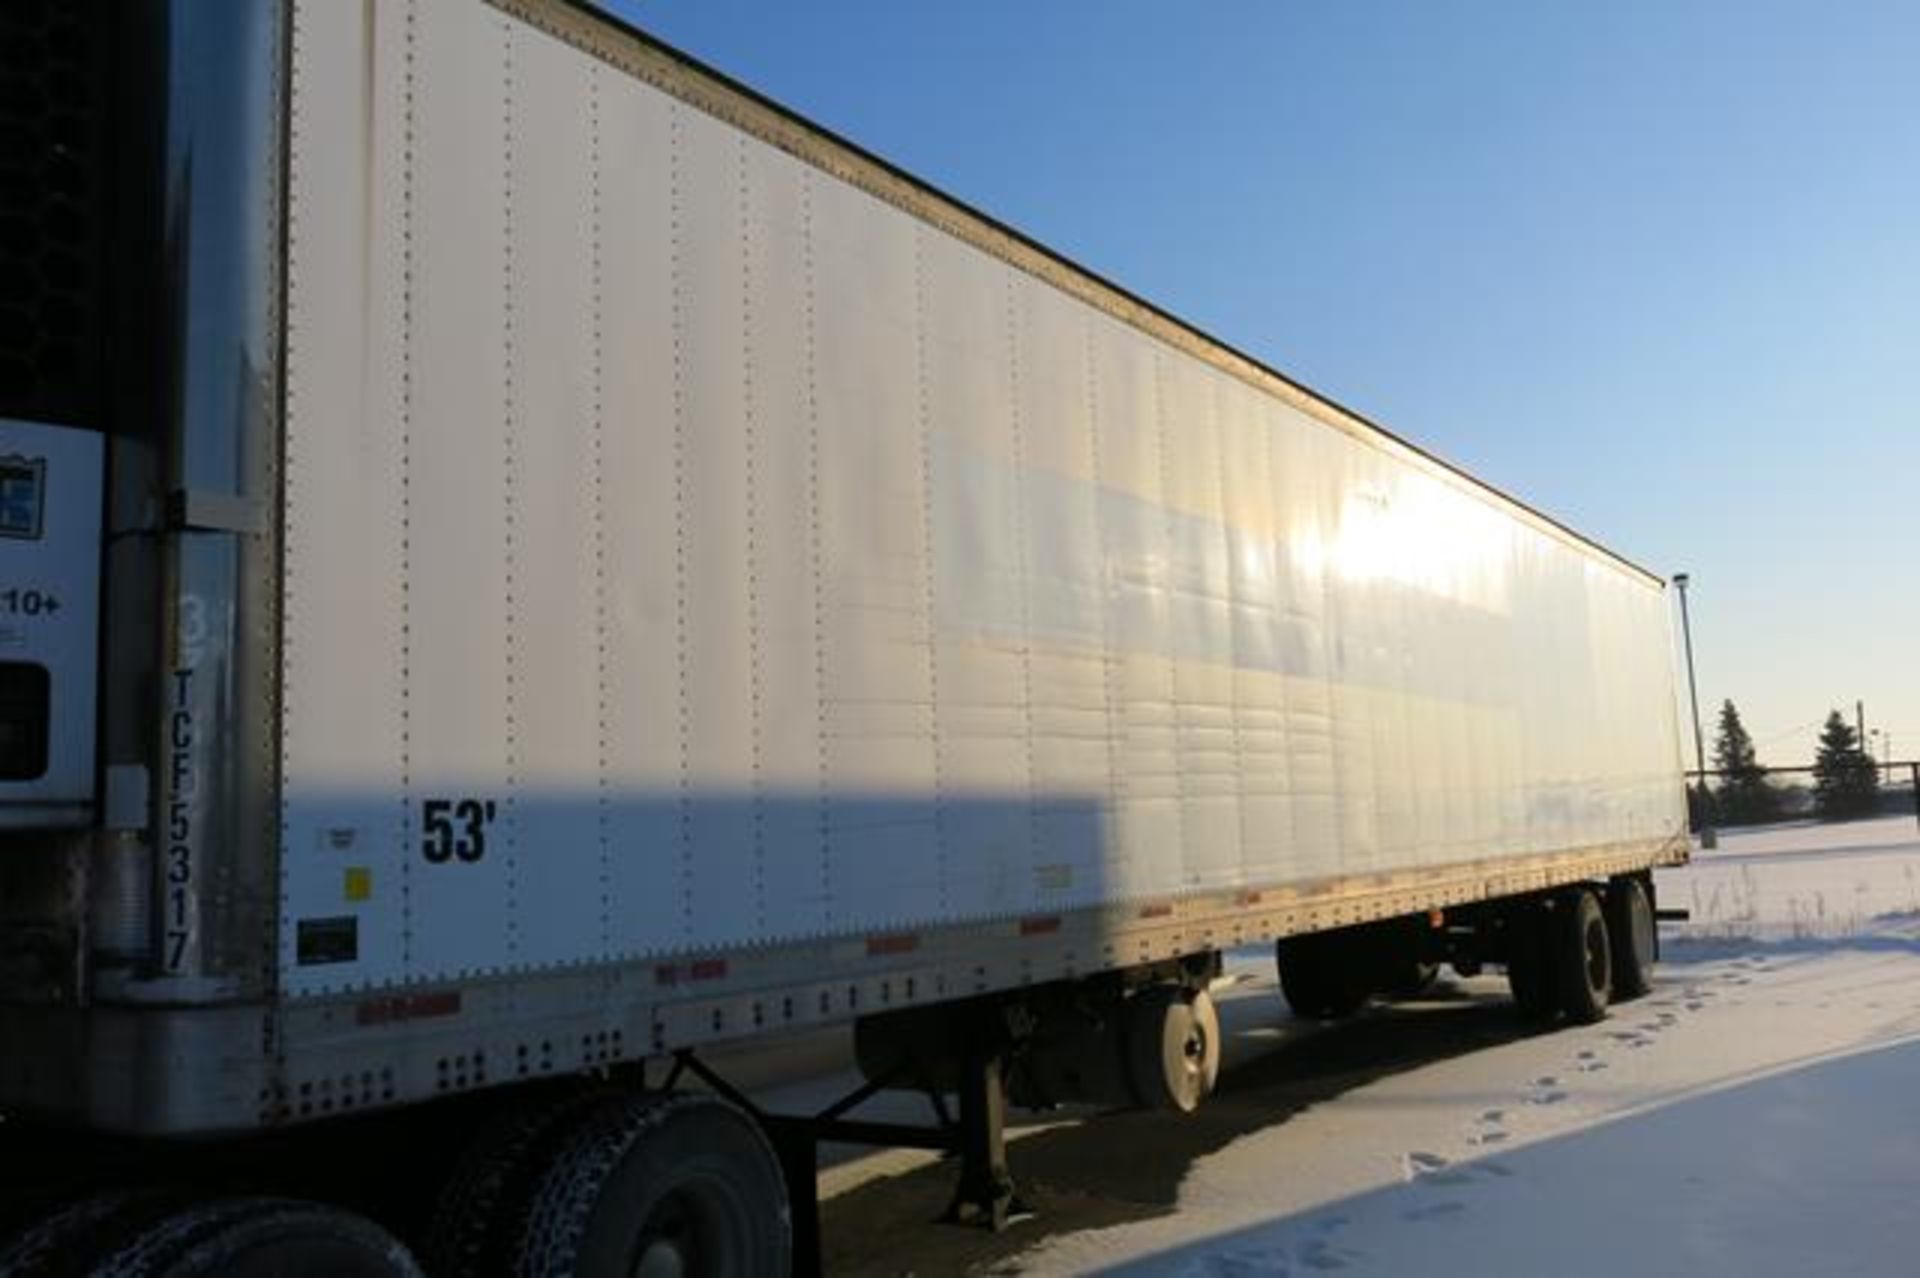 TRAILMOBILE, 53' REFRIGERATED VAN TRAILER, ROLLUP DOOR, THERMO KING, SB-210+, REEFER, 12,296